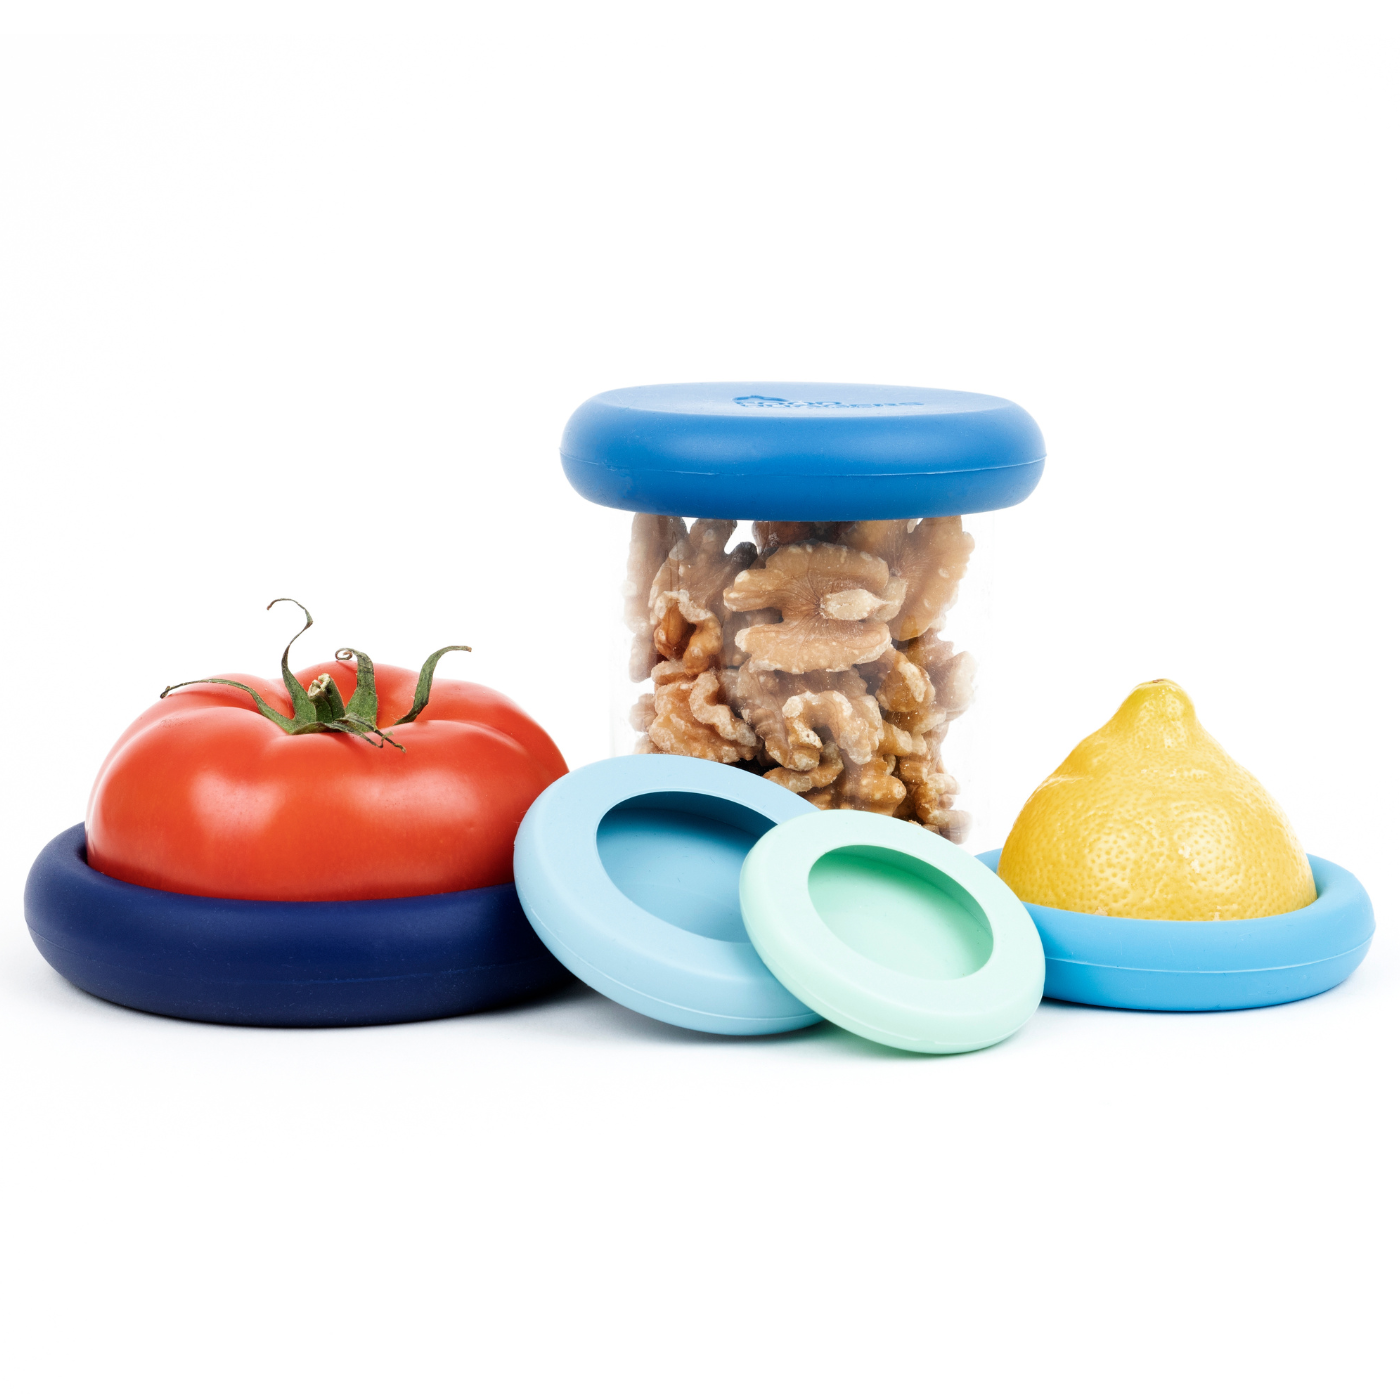 Set of five blue sustainable Food Huggers that seal and preserve a tomato, and also a replacement lid for jars